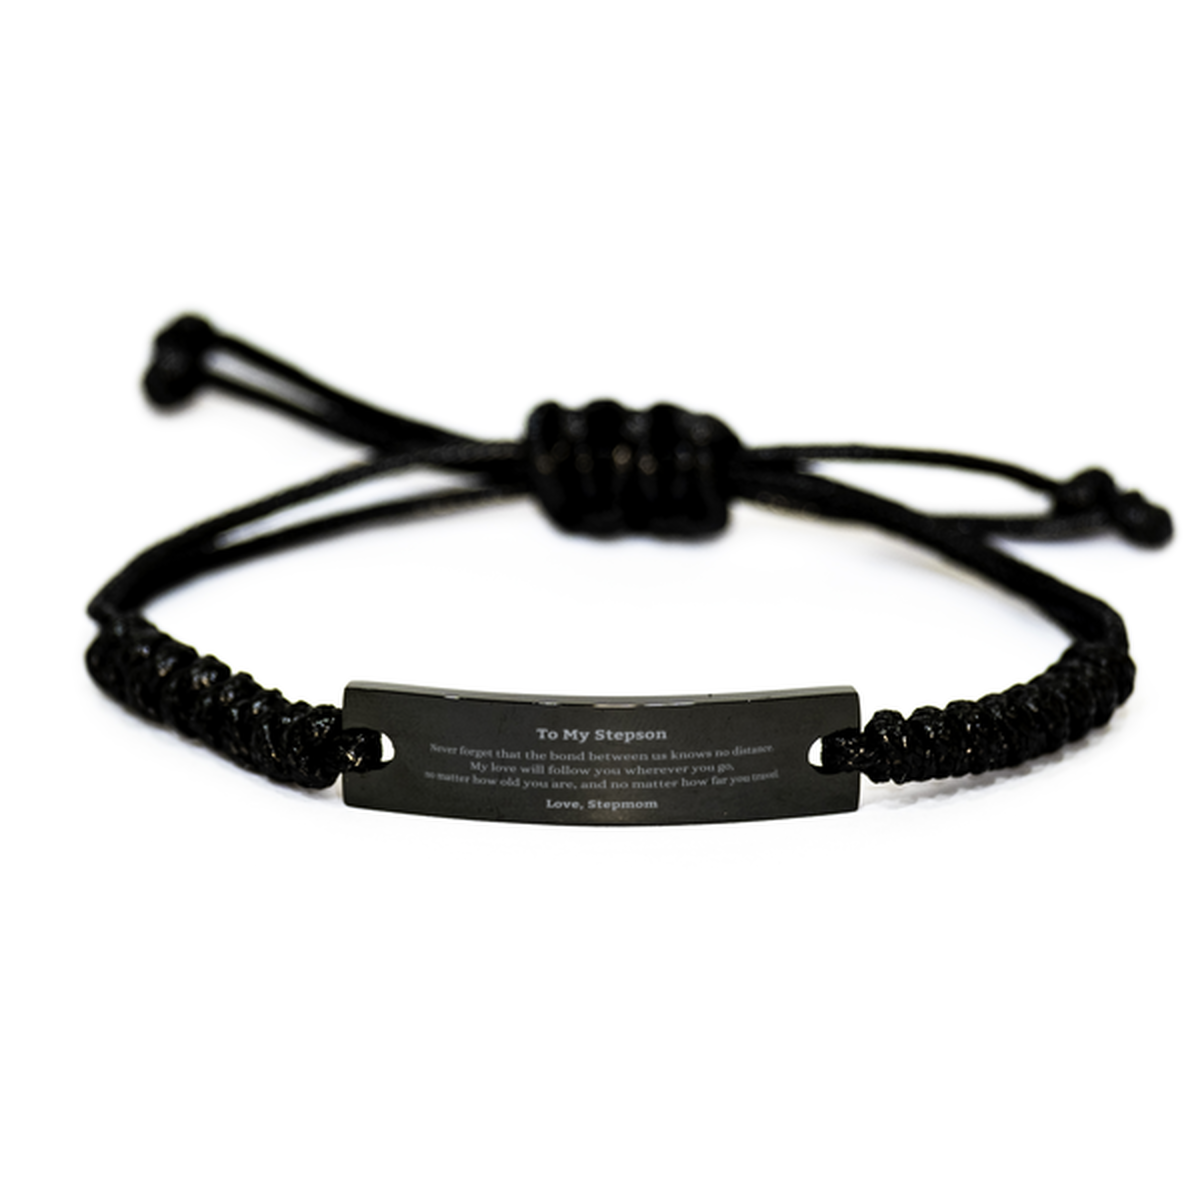 Stepson Birthday Gifts from Stepmom, Adjustable Black Rope Bracelet for Stepson Christmas Graduation Unique Gifts Stepson Never forget that the bond between us knows no distance. Love, Stepmom